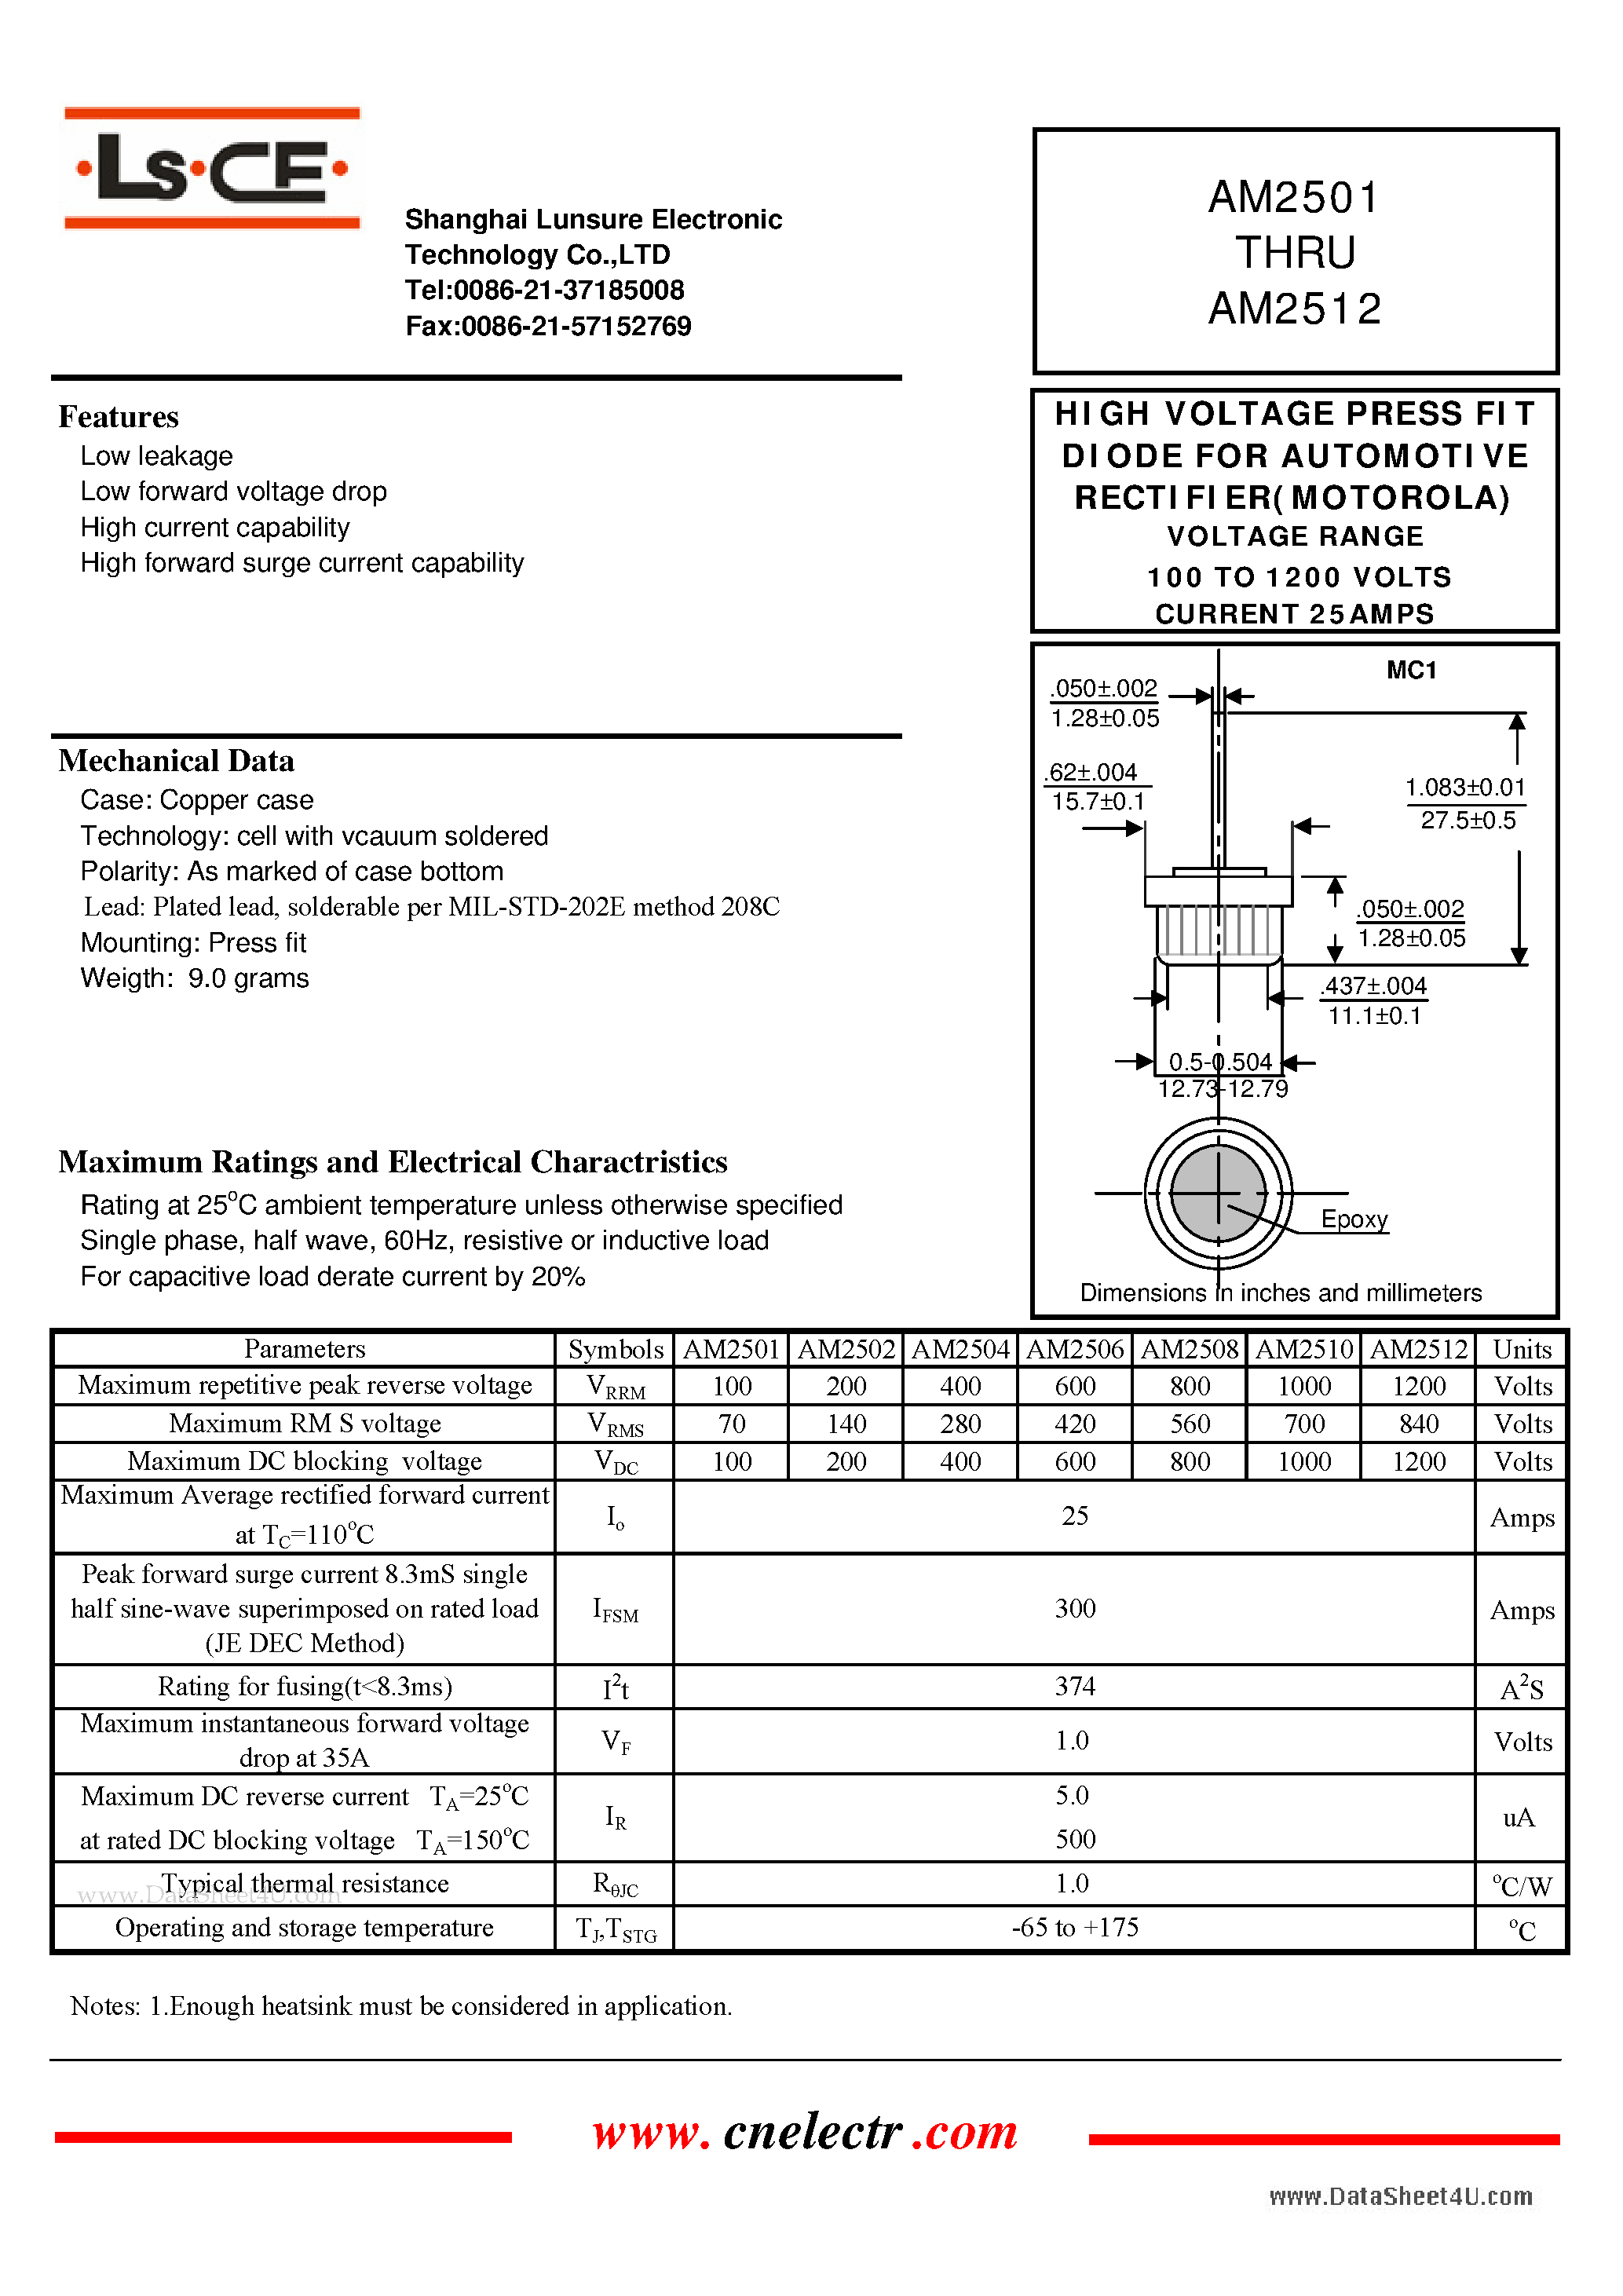 Datasheet AM2501 - (AM2501 - AM2512) HIGH VOLTAGE PRESS FIT DIODE FOR AUTOMOTIVE RECTIFIER page 1